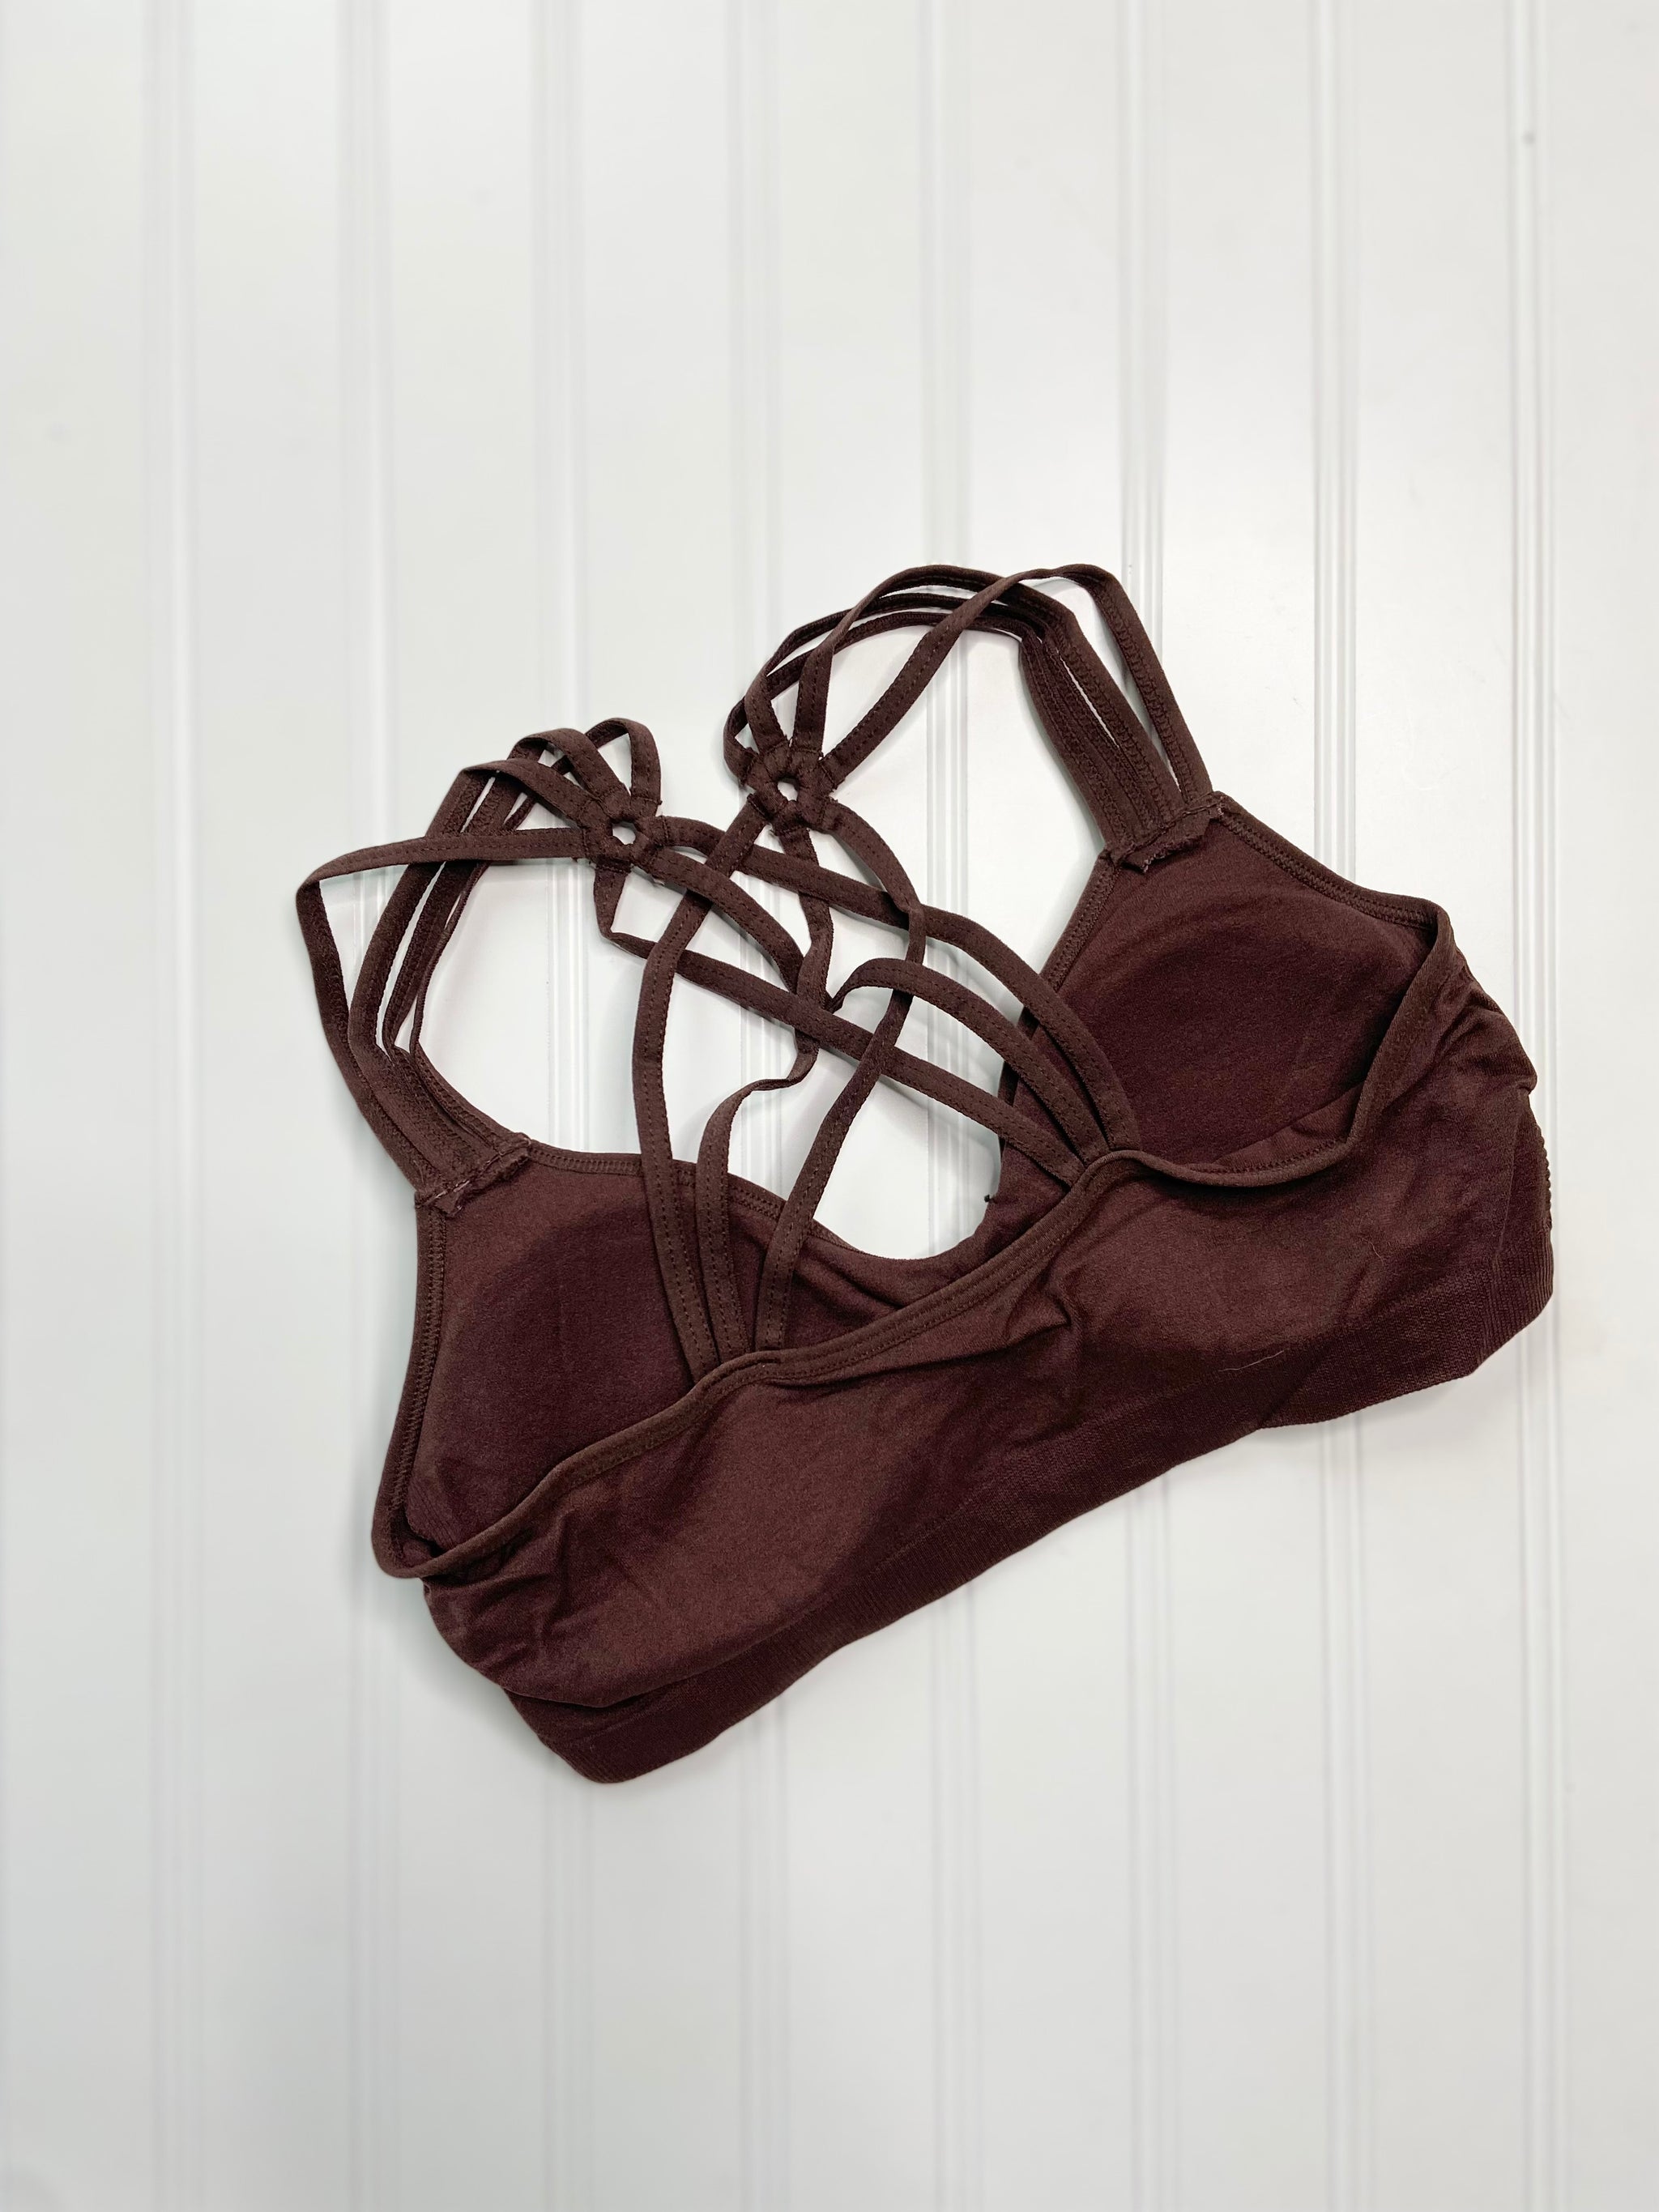 Chocolate Brown Strappy Bralette - The Peach Mimosa